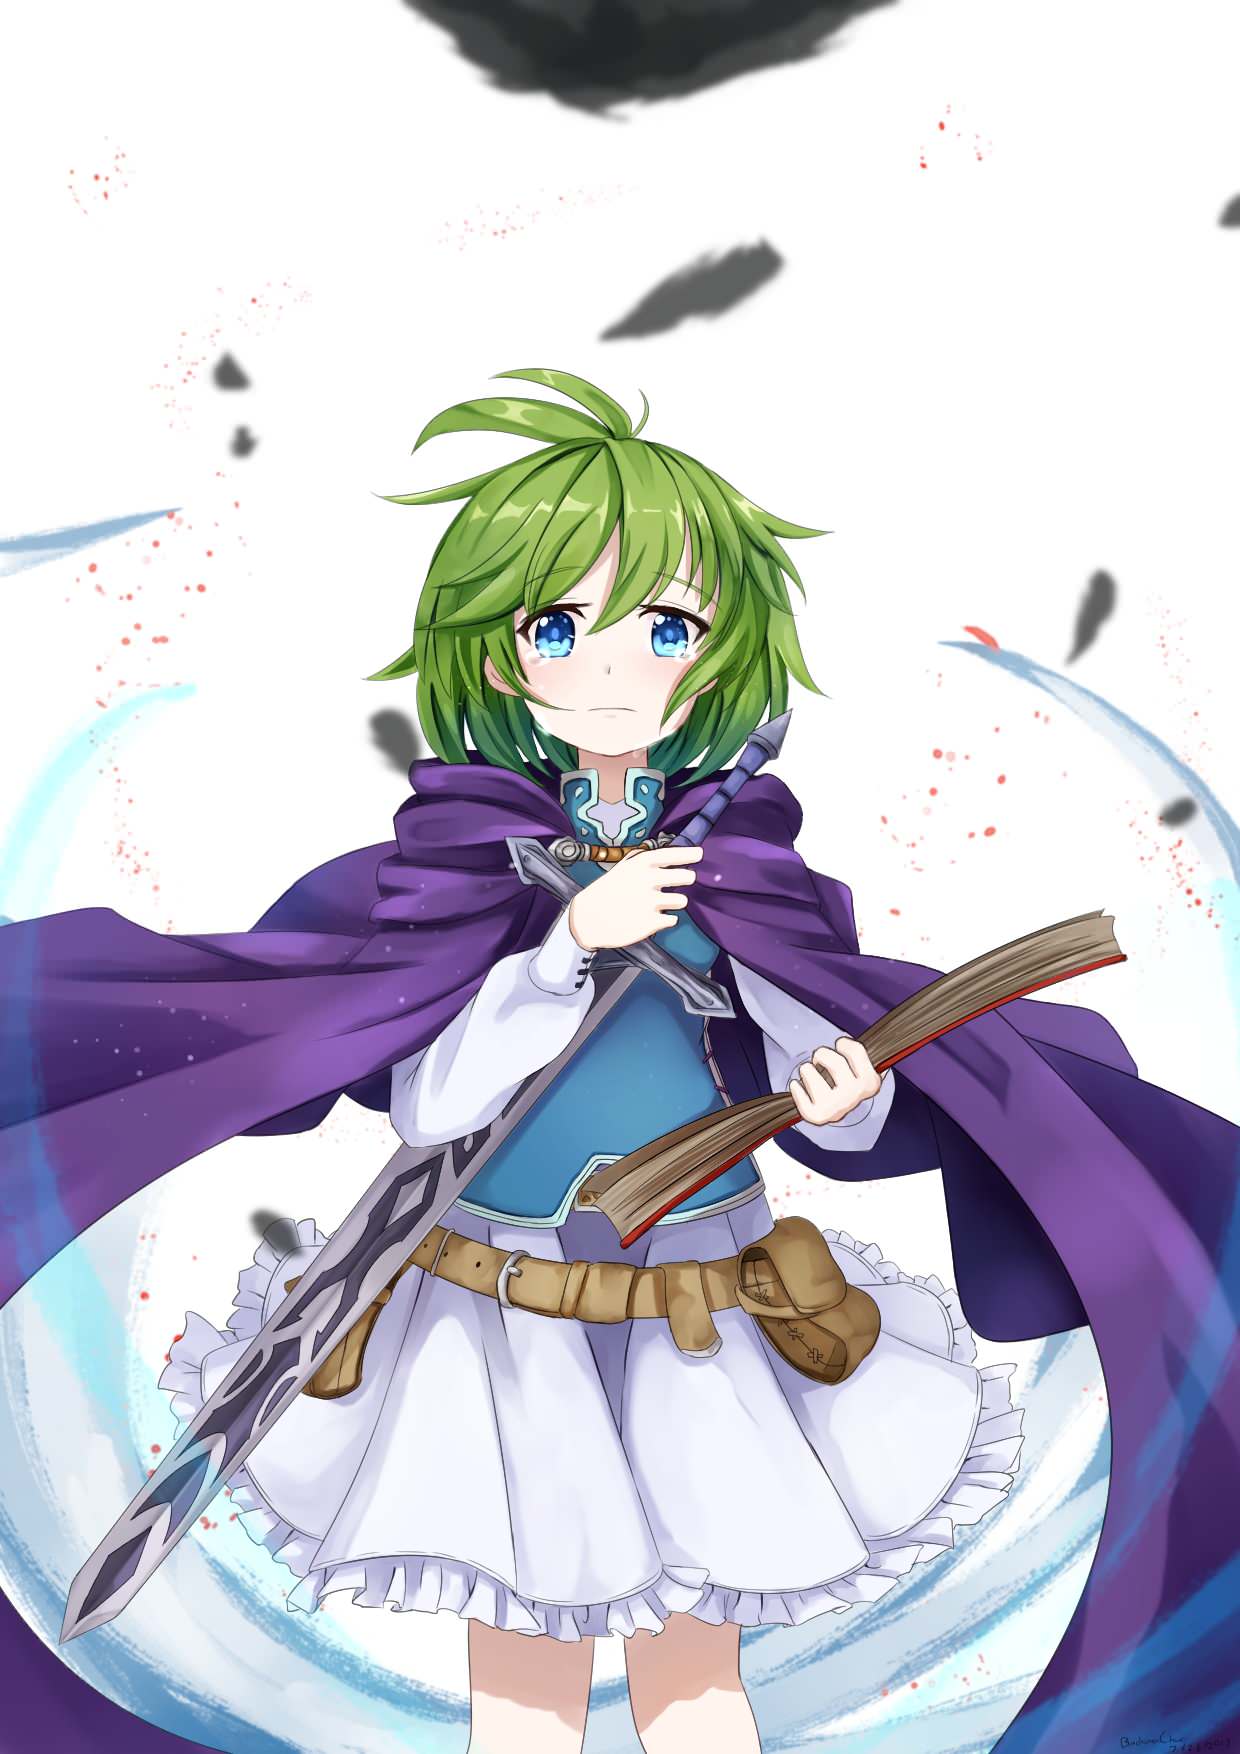 Purple and White Wolf Logo - Who forced Nino to put down the White Wolf? (Blackma) : FireEmblemHeroes